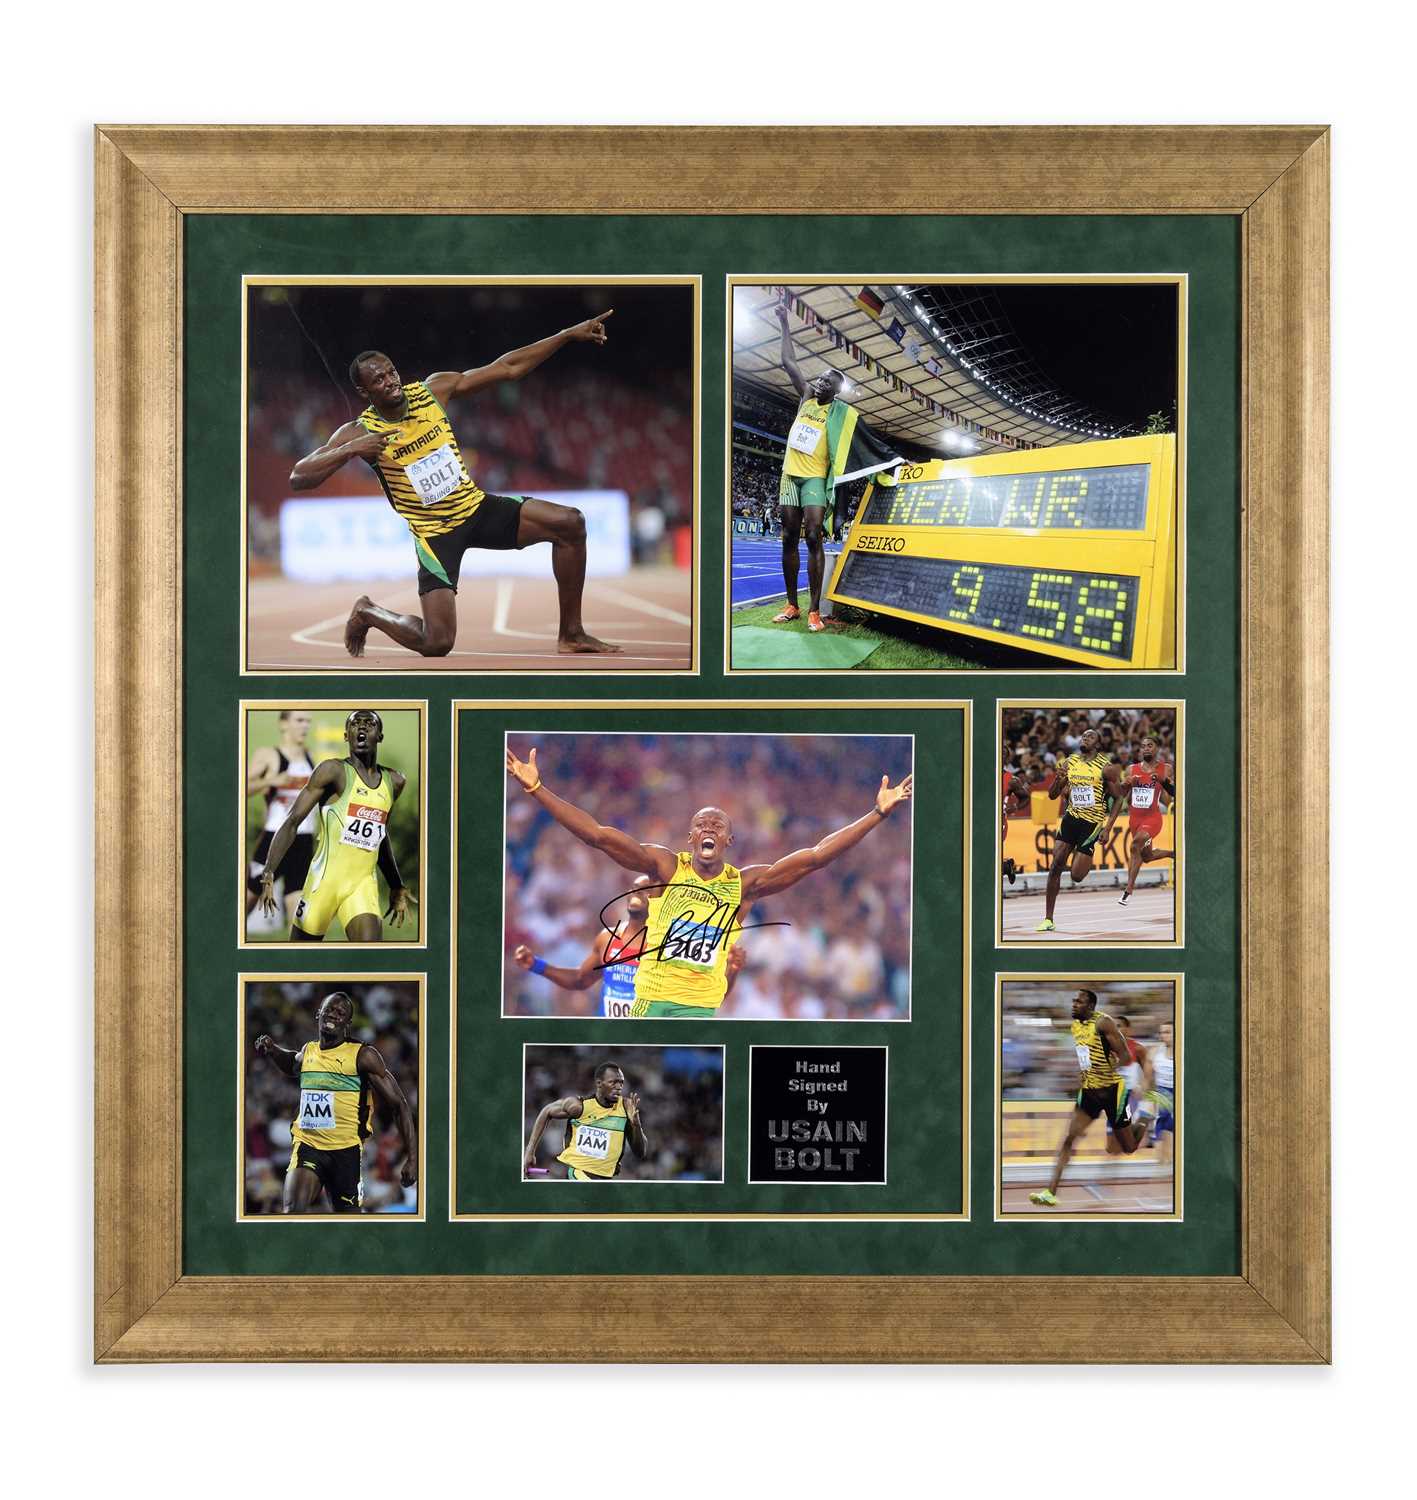 Usain Bolt Signed Photo Montage Usain Bolt is widely regarded as the greatest sprinter of all